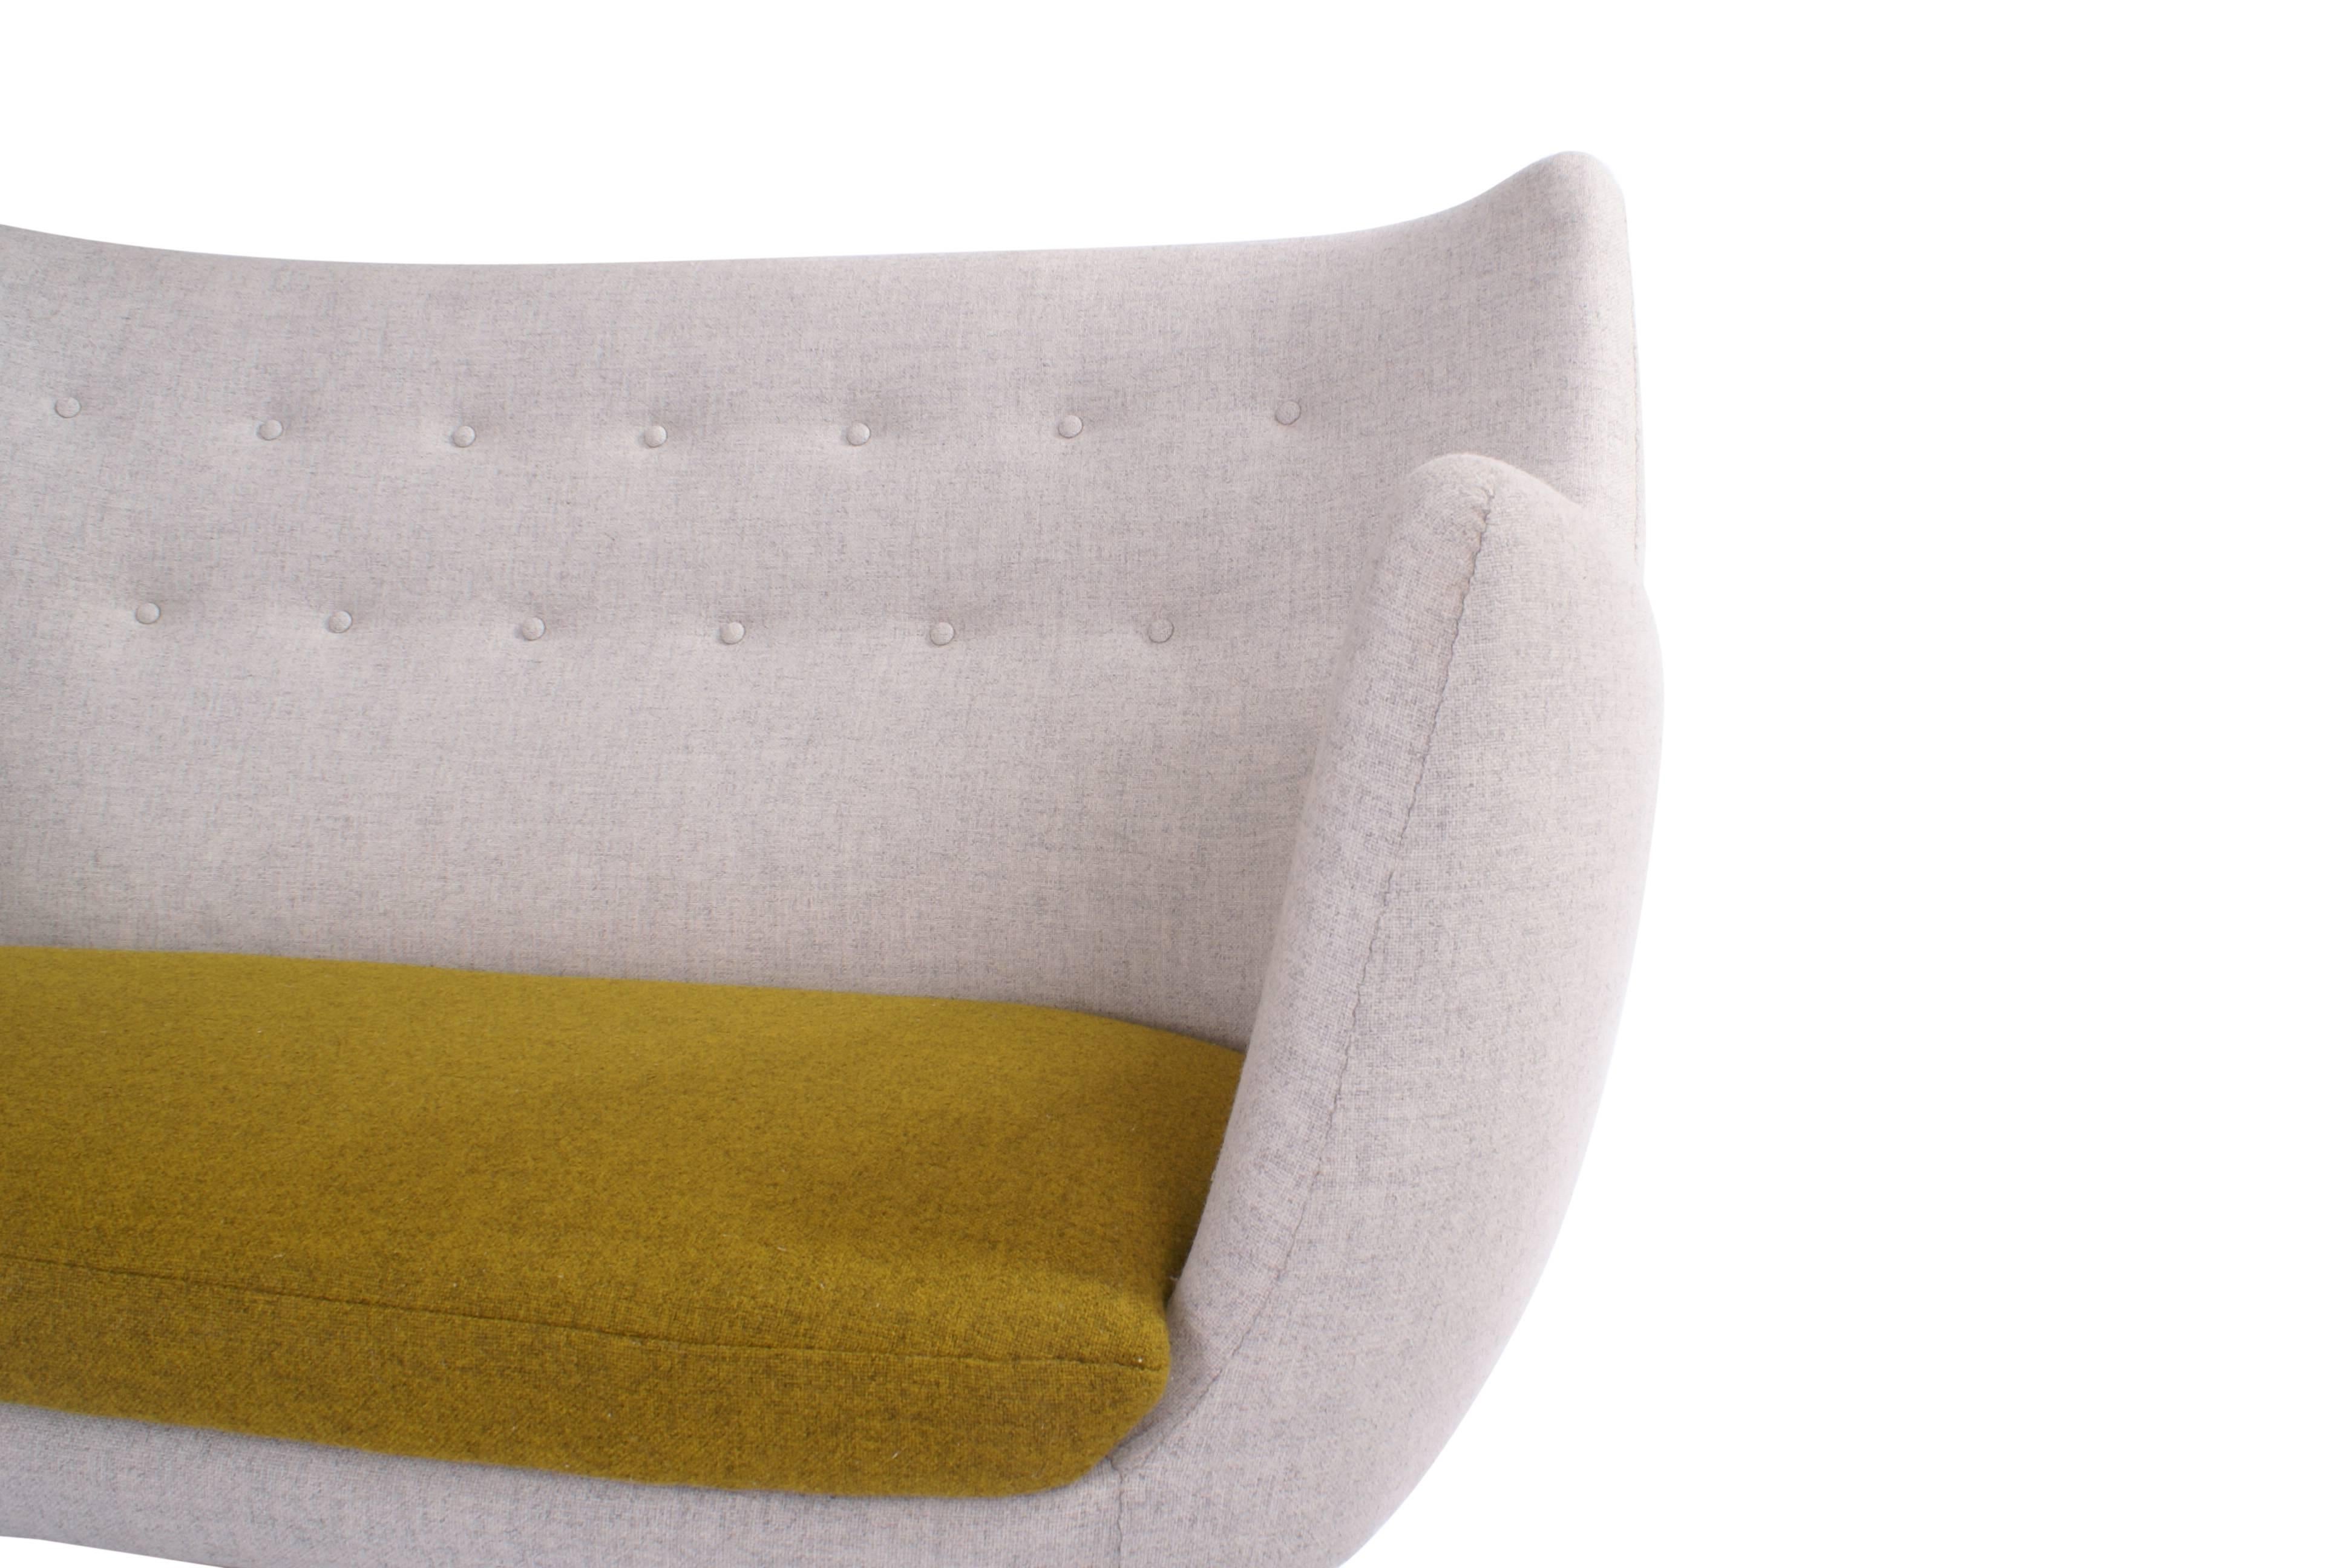 Finn Juhl 'Poet' settee for Niels Vodder.

Freestanding two-seat sofa with round, tapering legs. Sides and back upholstered with grey wool, loose seat cushion upholstered with dark yellow wool. Back fitted with buttons. Designed 1941.

For